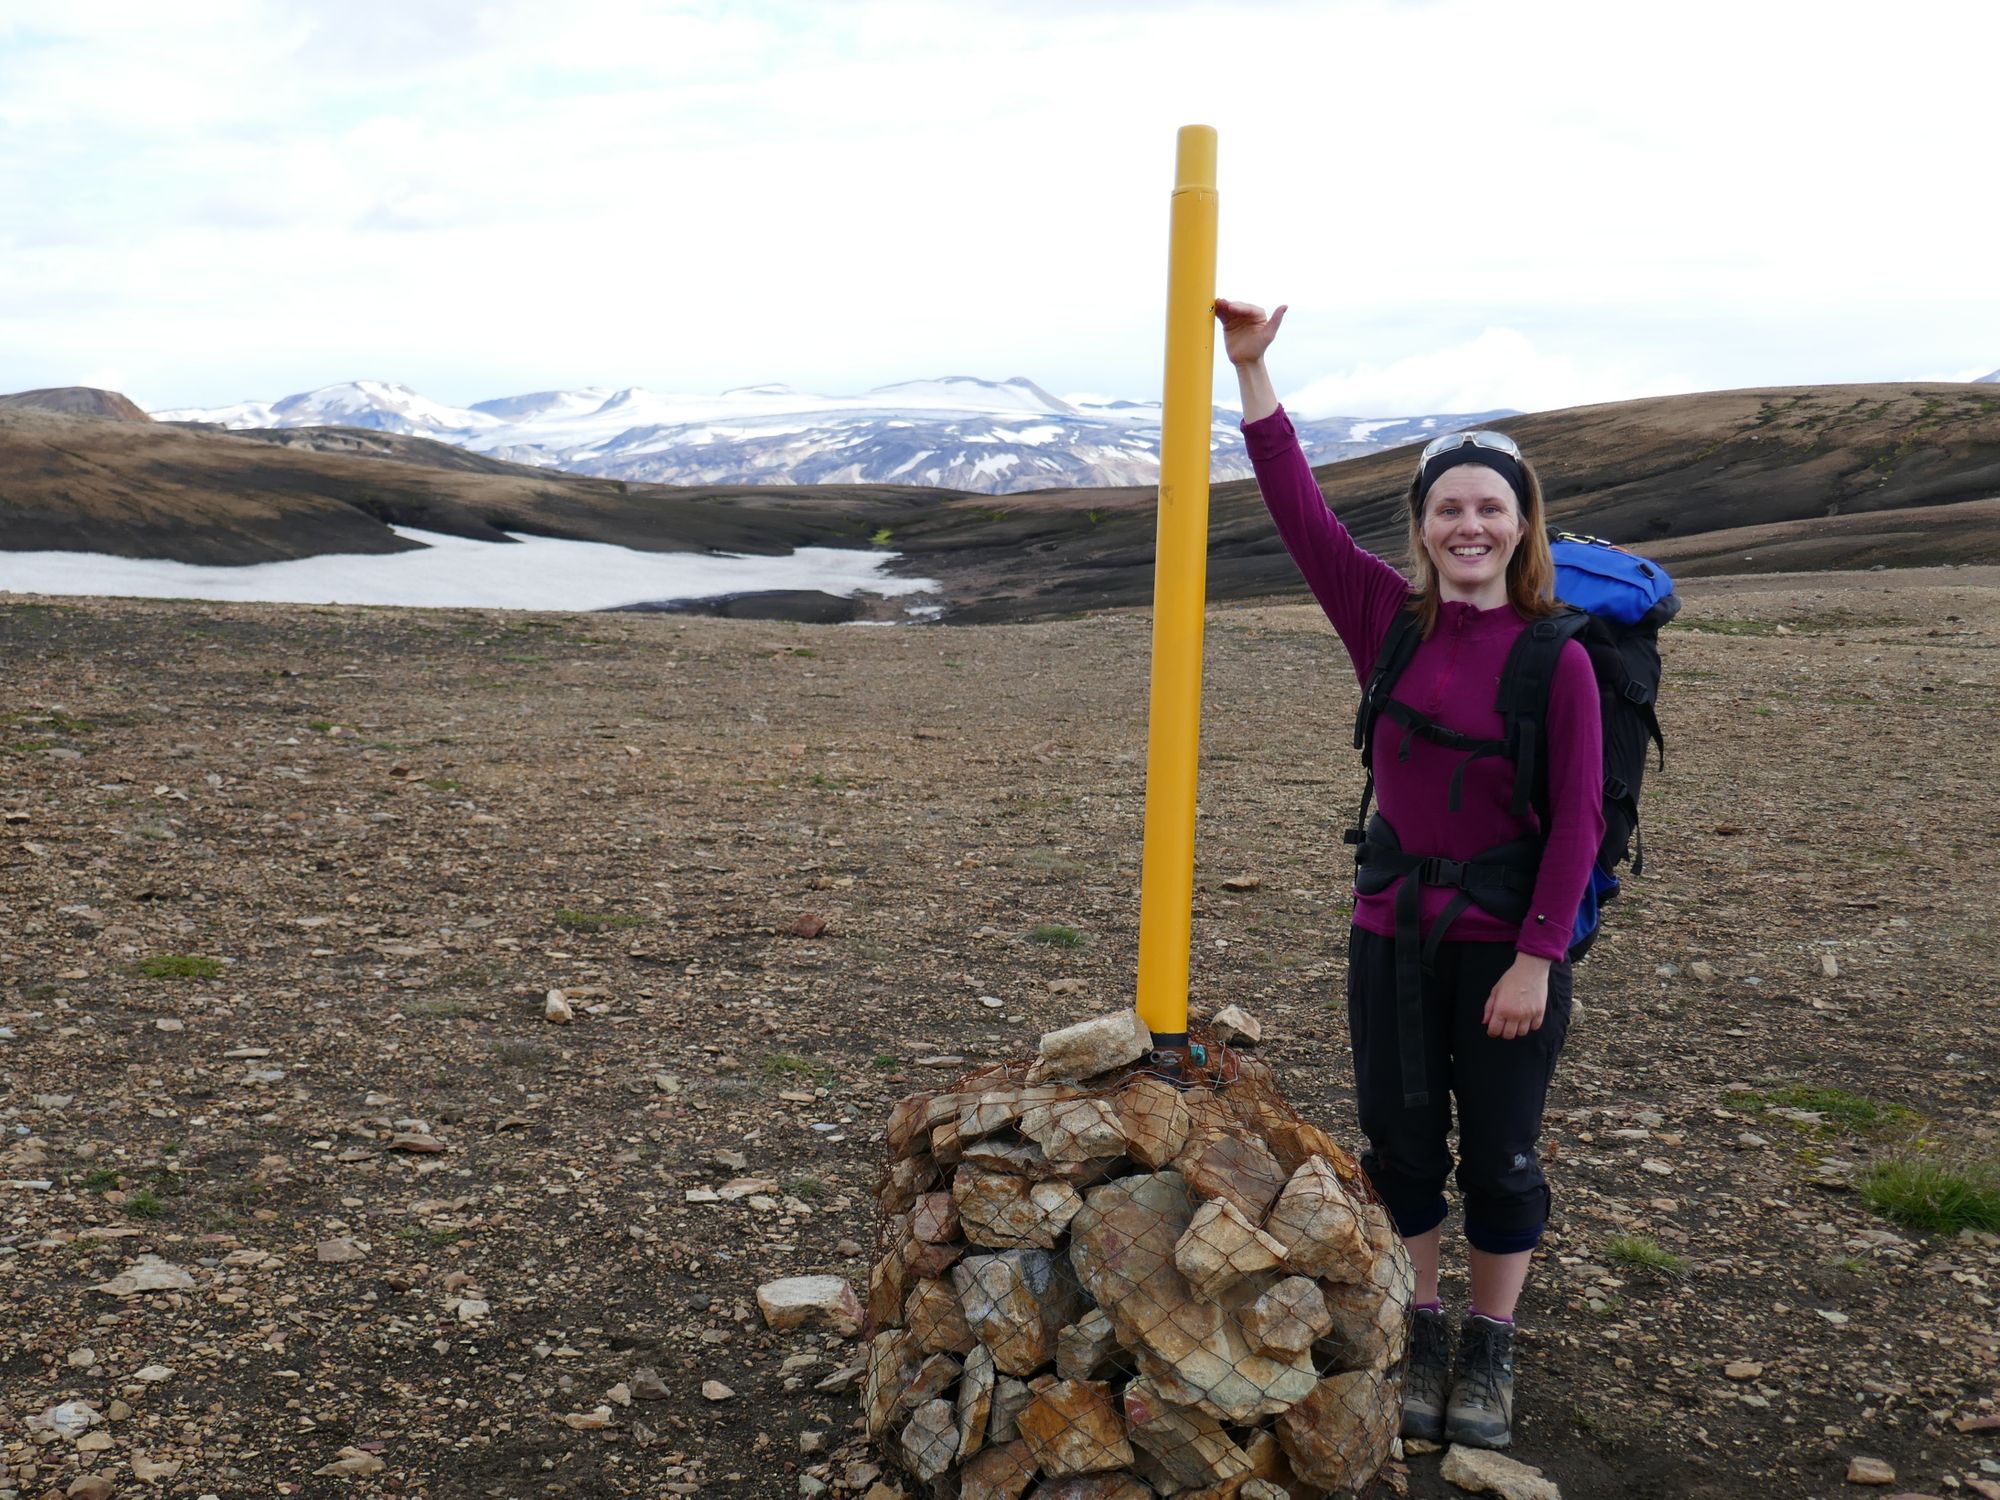 A woman hiker poses behind a snow pole on the Laugavegur Trail, in Iceland.